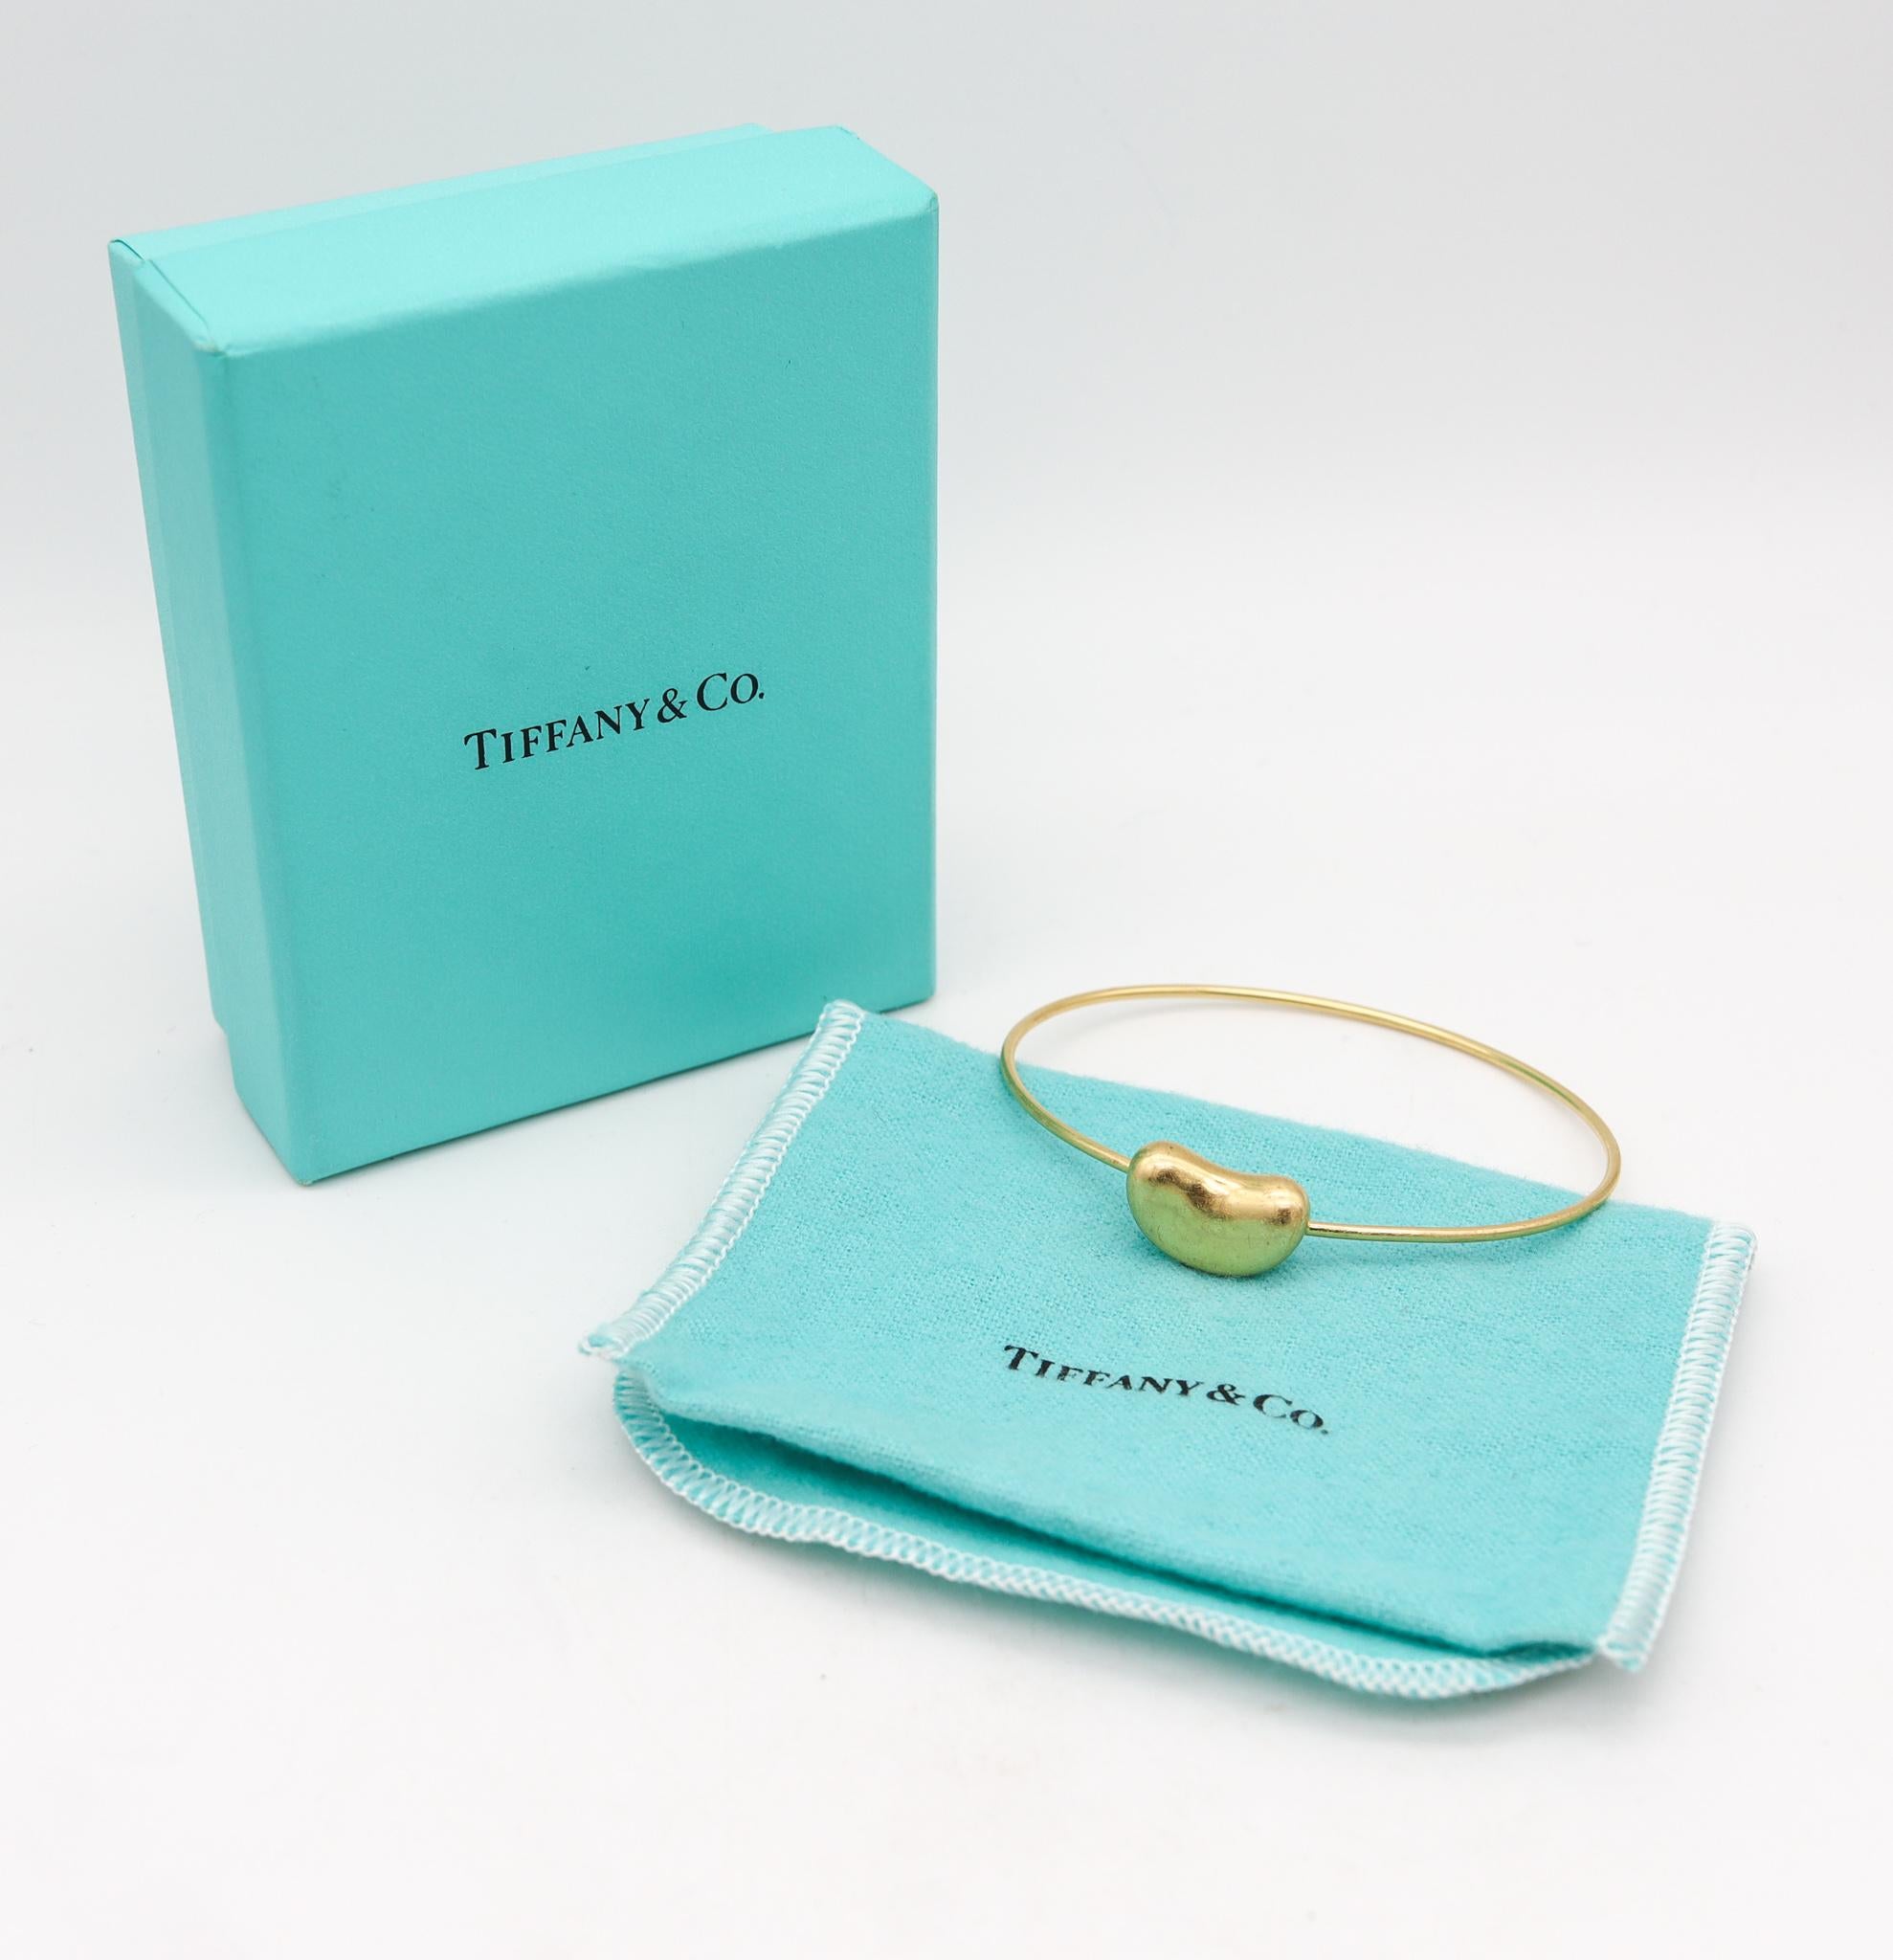 Bean bracelet designed by Elsa Peretti (1940-2021) for Tiffany & Co.

A vintage iconic bean bangle bracelet, created in New York city at the Tiffany Studios in New York city by Elsa Peretti, back in the 1970's. This unusual bean bracelet is very